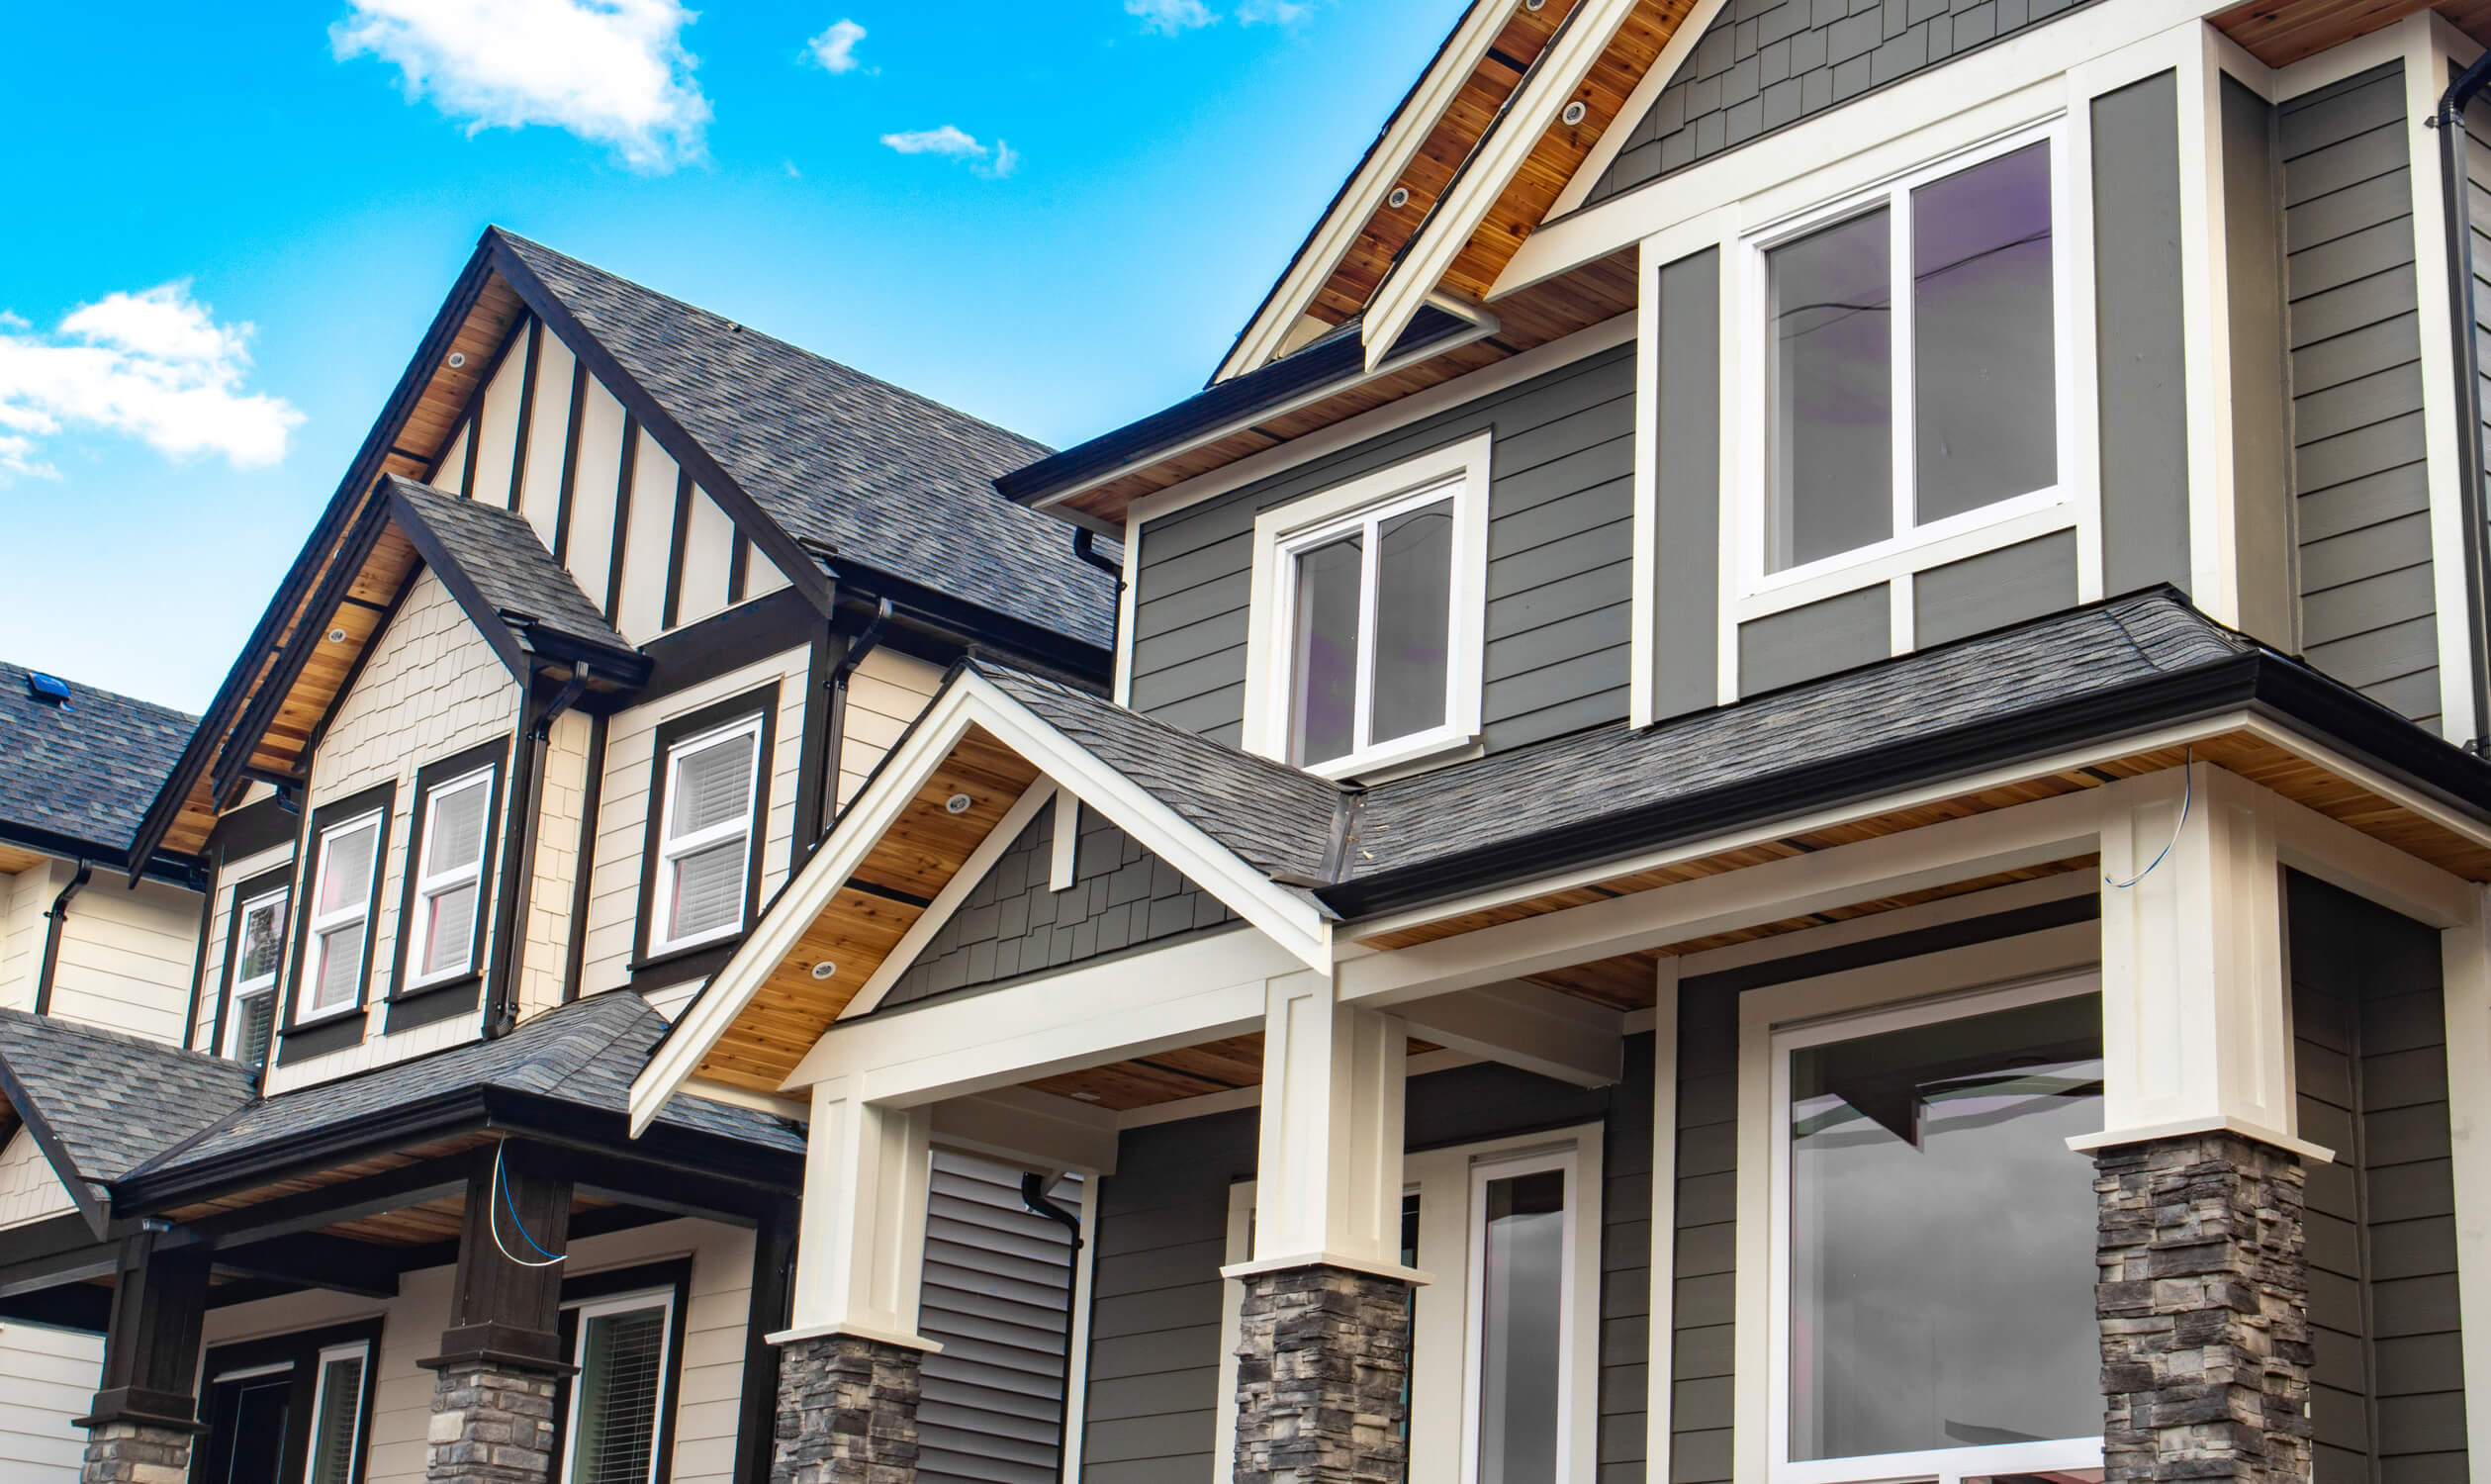 What are the disadvantages of vinyl siding?